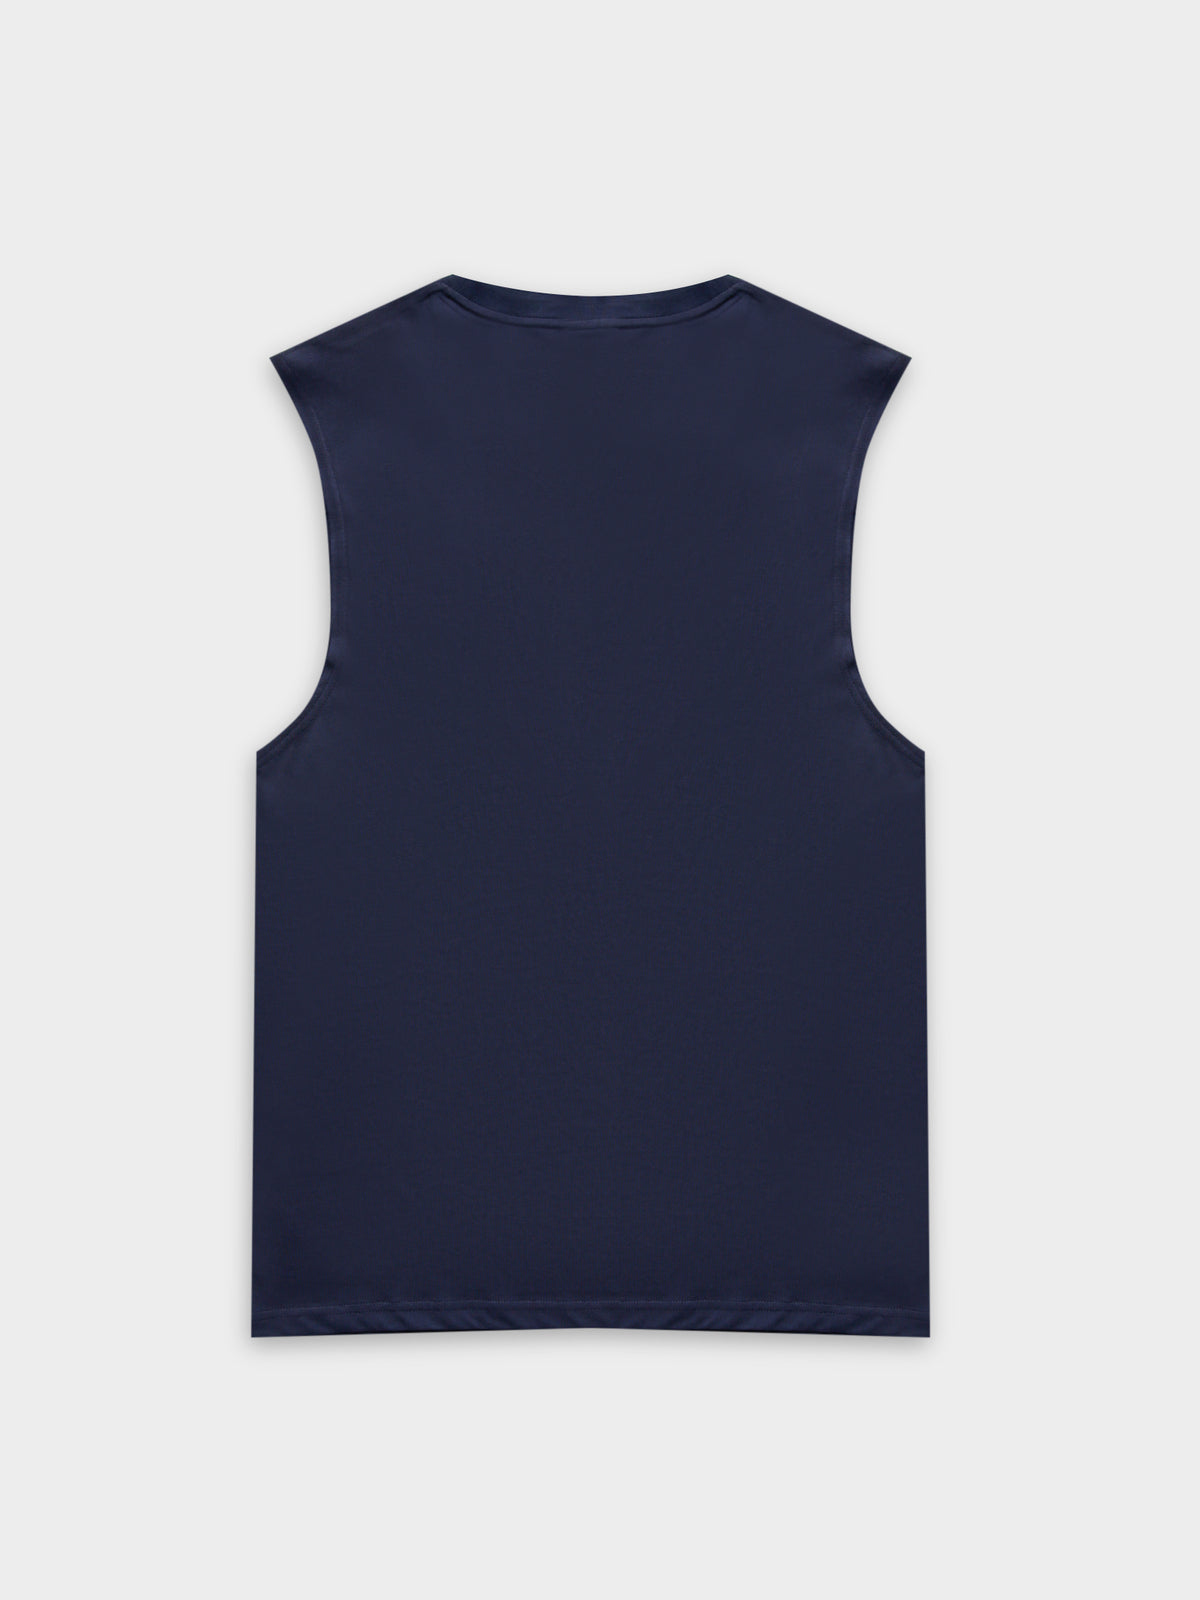 Vice Muscle in Navy